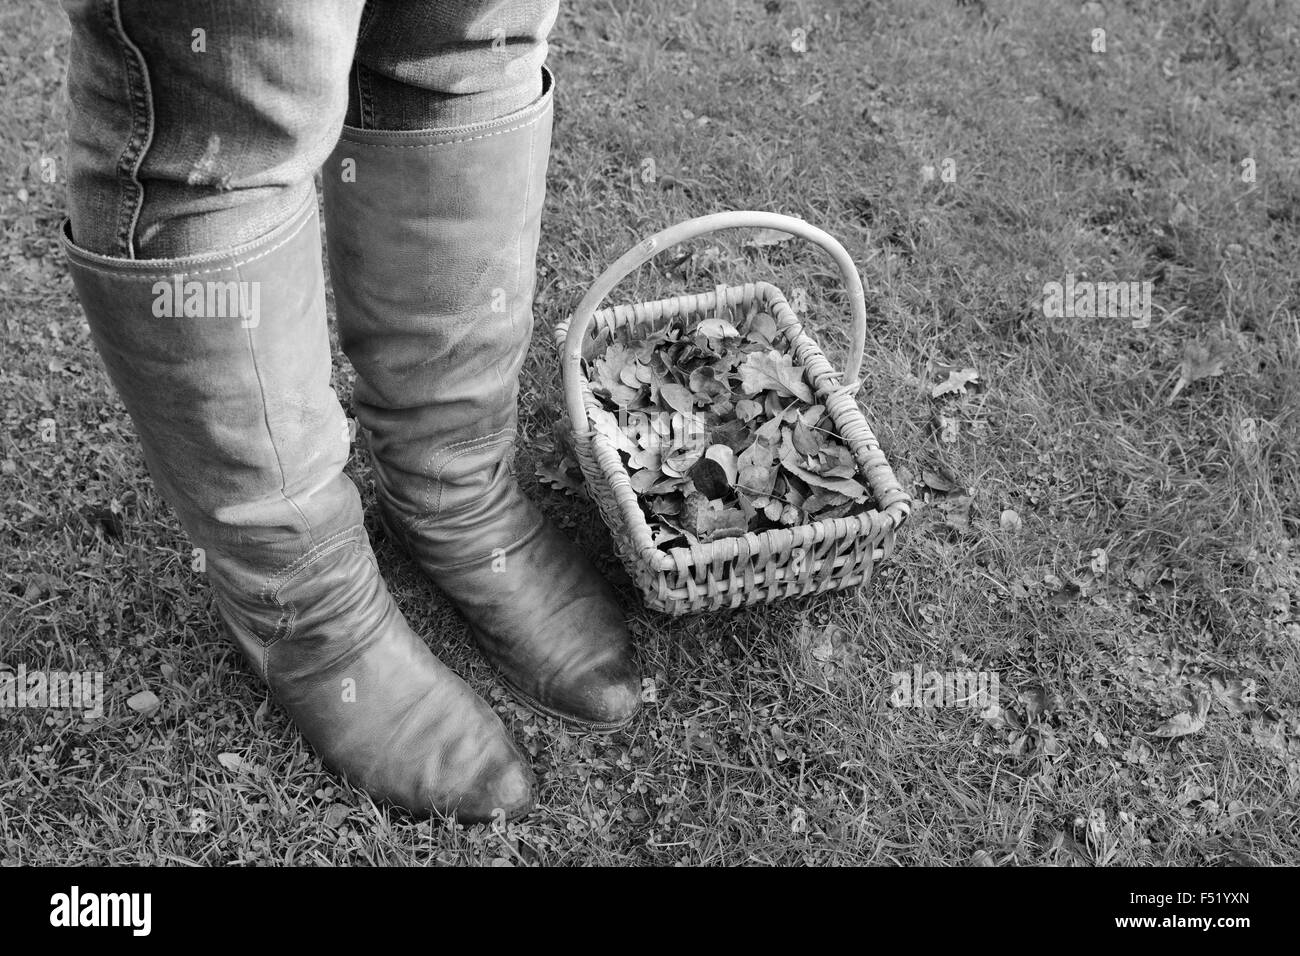 Woman wearing knee high winter boots standing next to a basket of autumn leaves on grass - monochrome processing Stock Photo